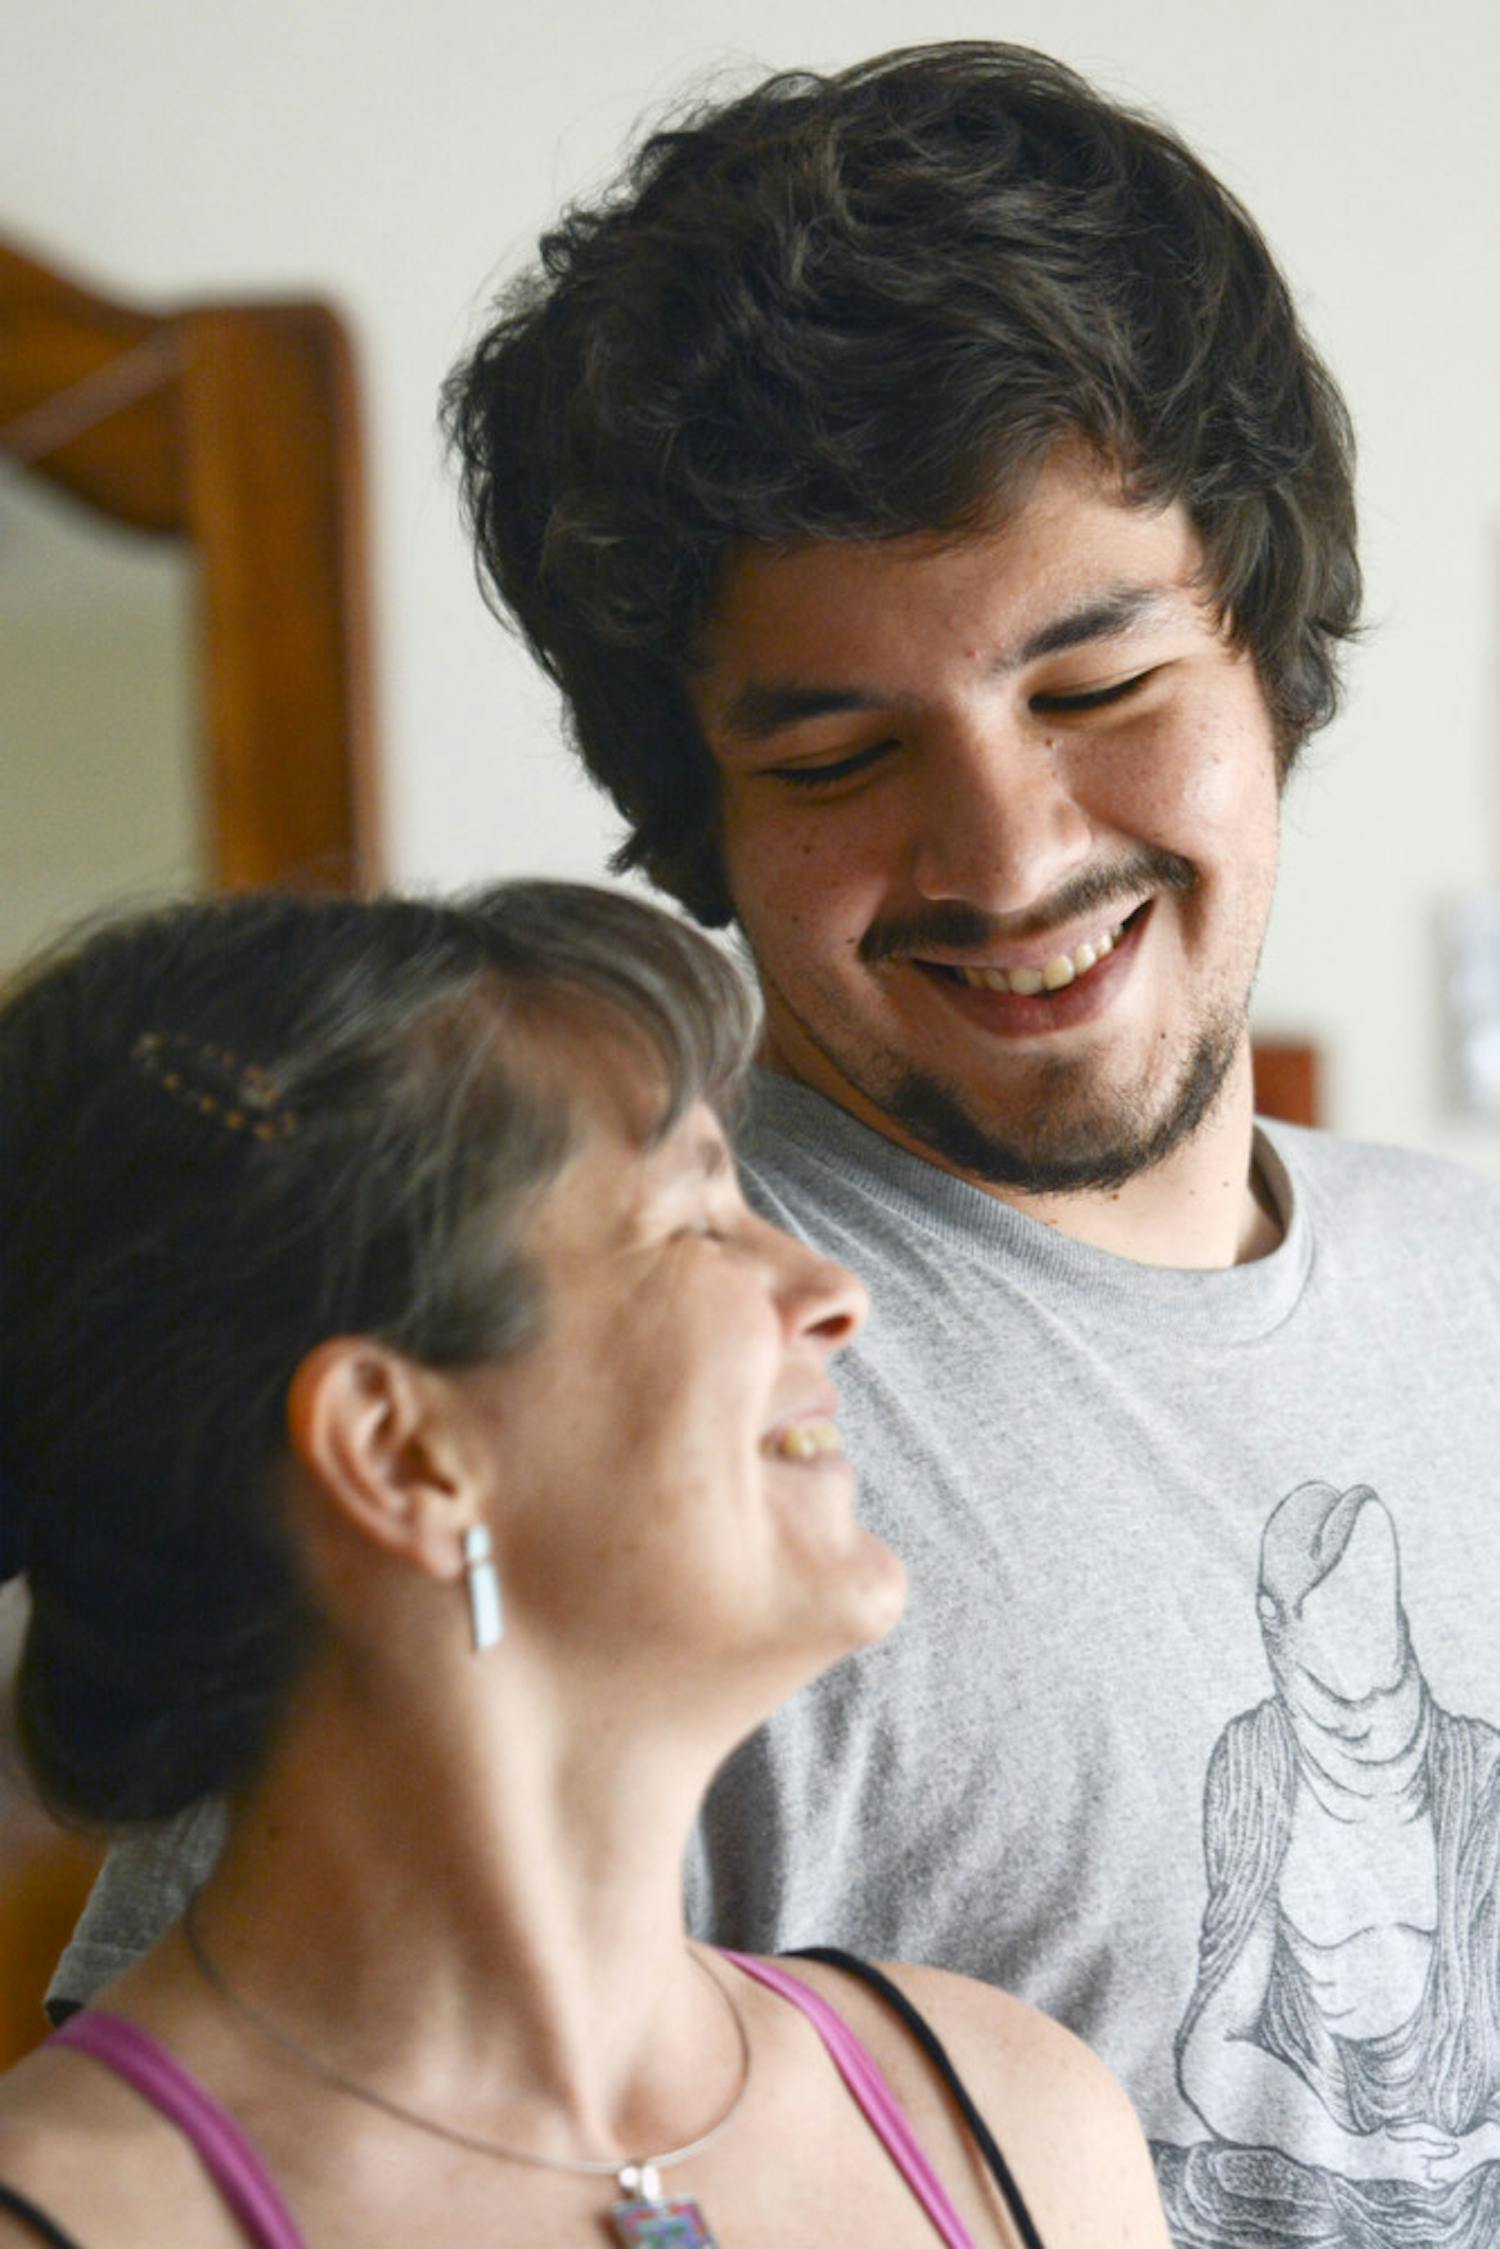 Claudia Castagliola, 45, laughs with her eldest son, Cristobal Gonzalez, 23, in her home’s living room. The two will graduate from a PhD program and a Master’s program, respectively, this week.